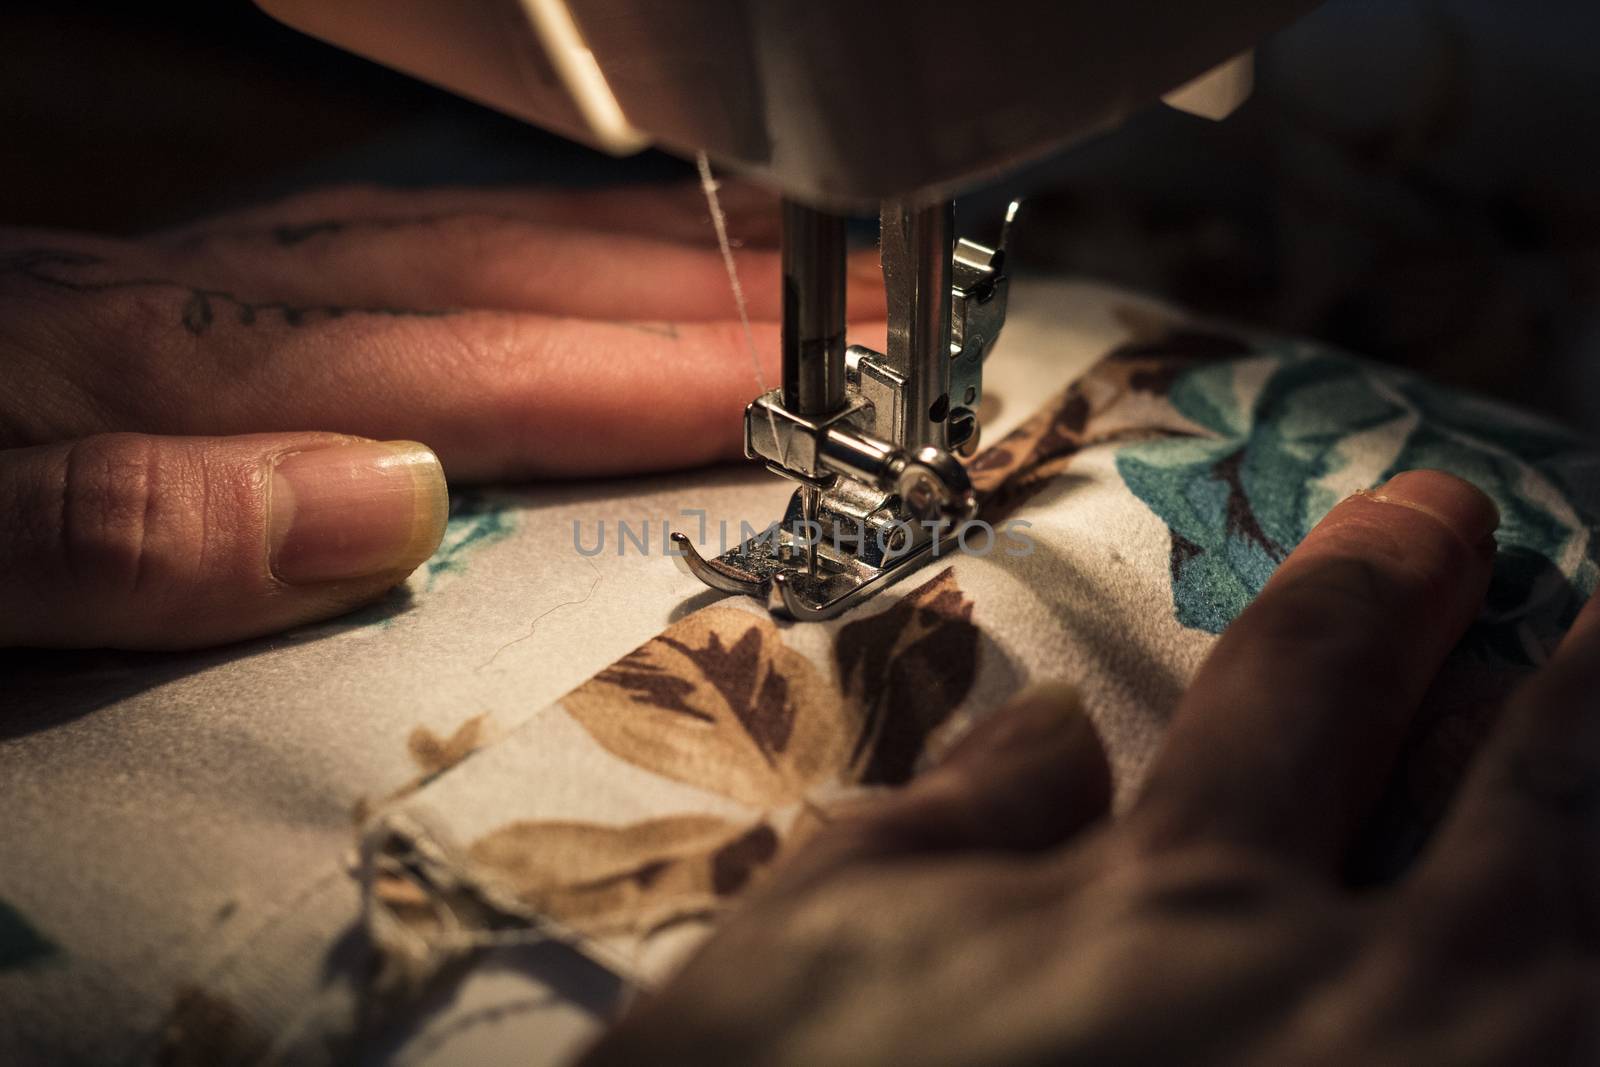 Tailor at work on sewing machine by oaltindag